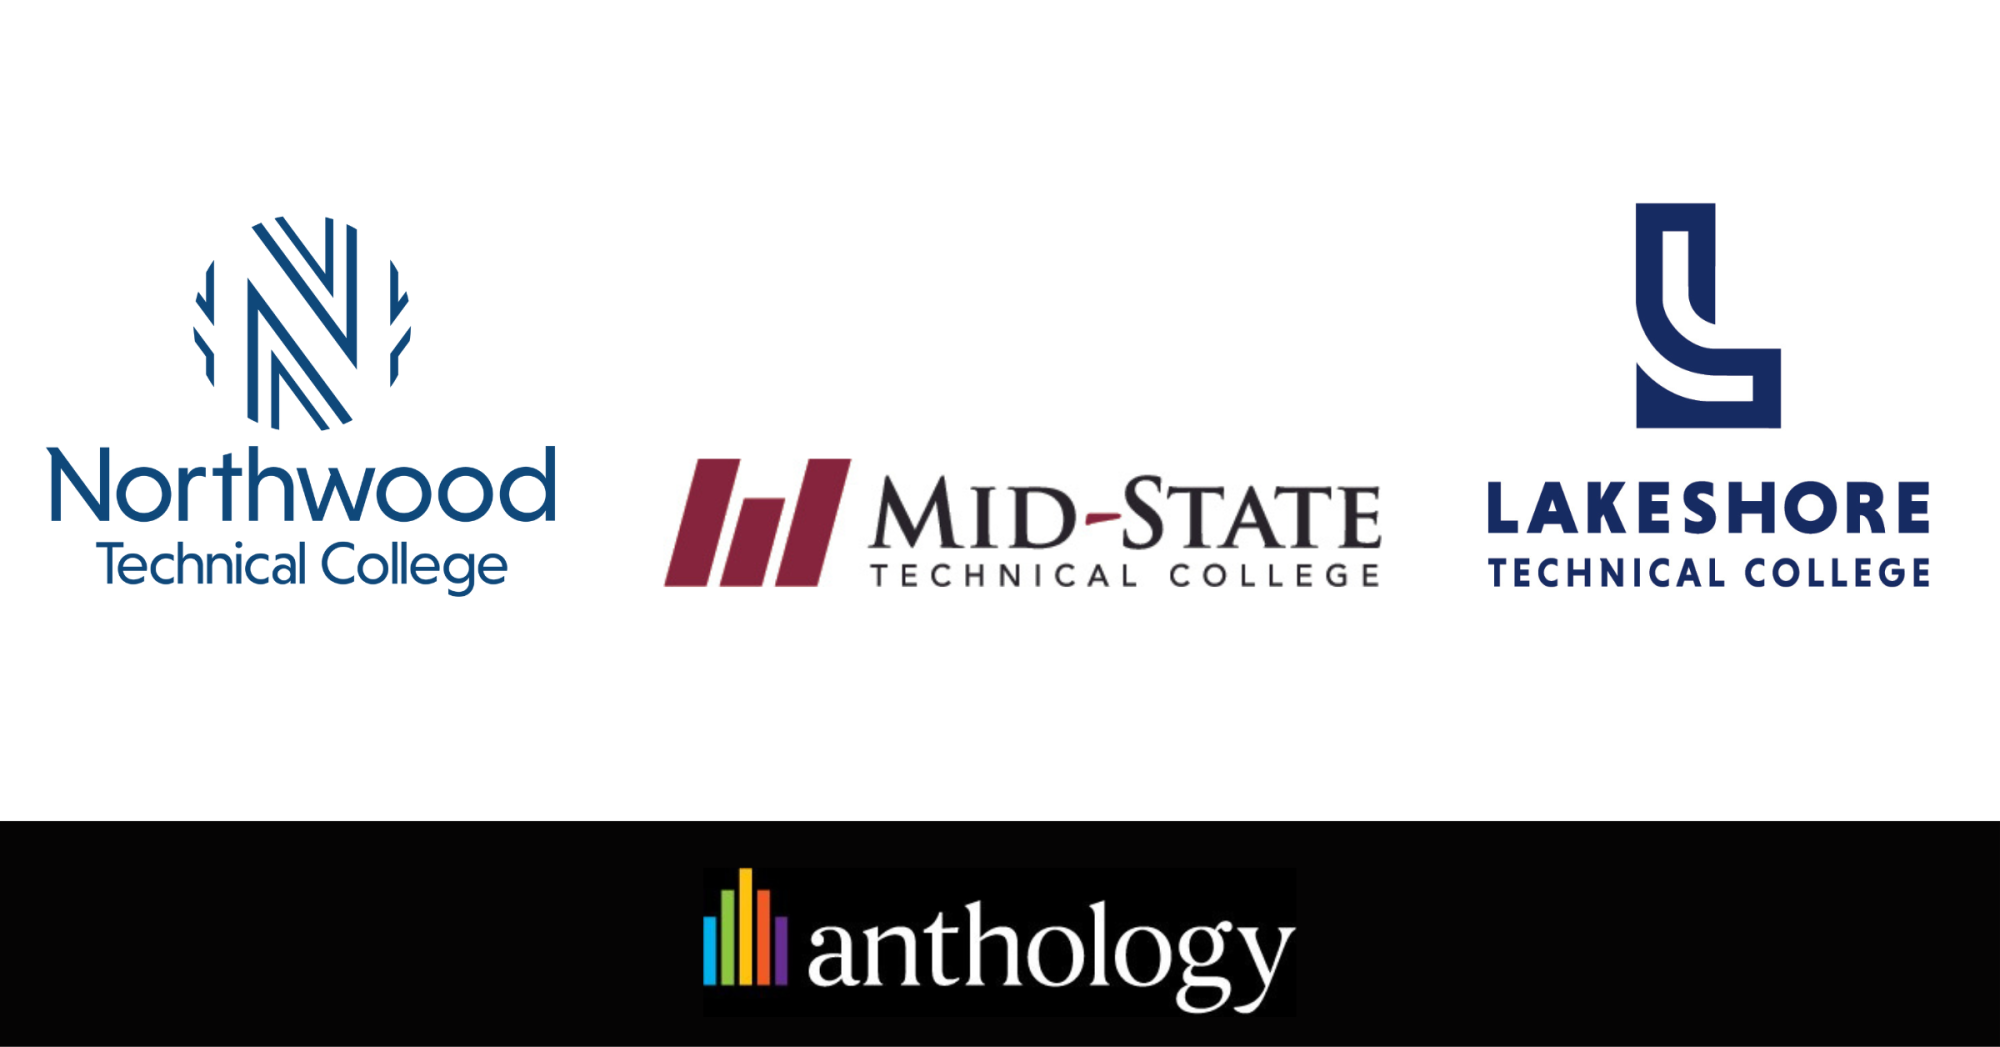 Northwood Technical College, Mid-State Technical College, and Lakeshore Technical College logos locked up with the Anthology logo